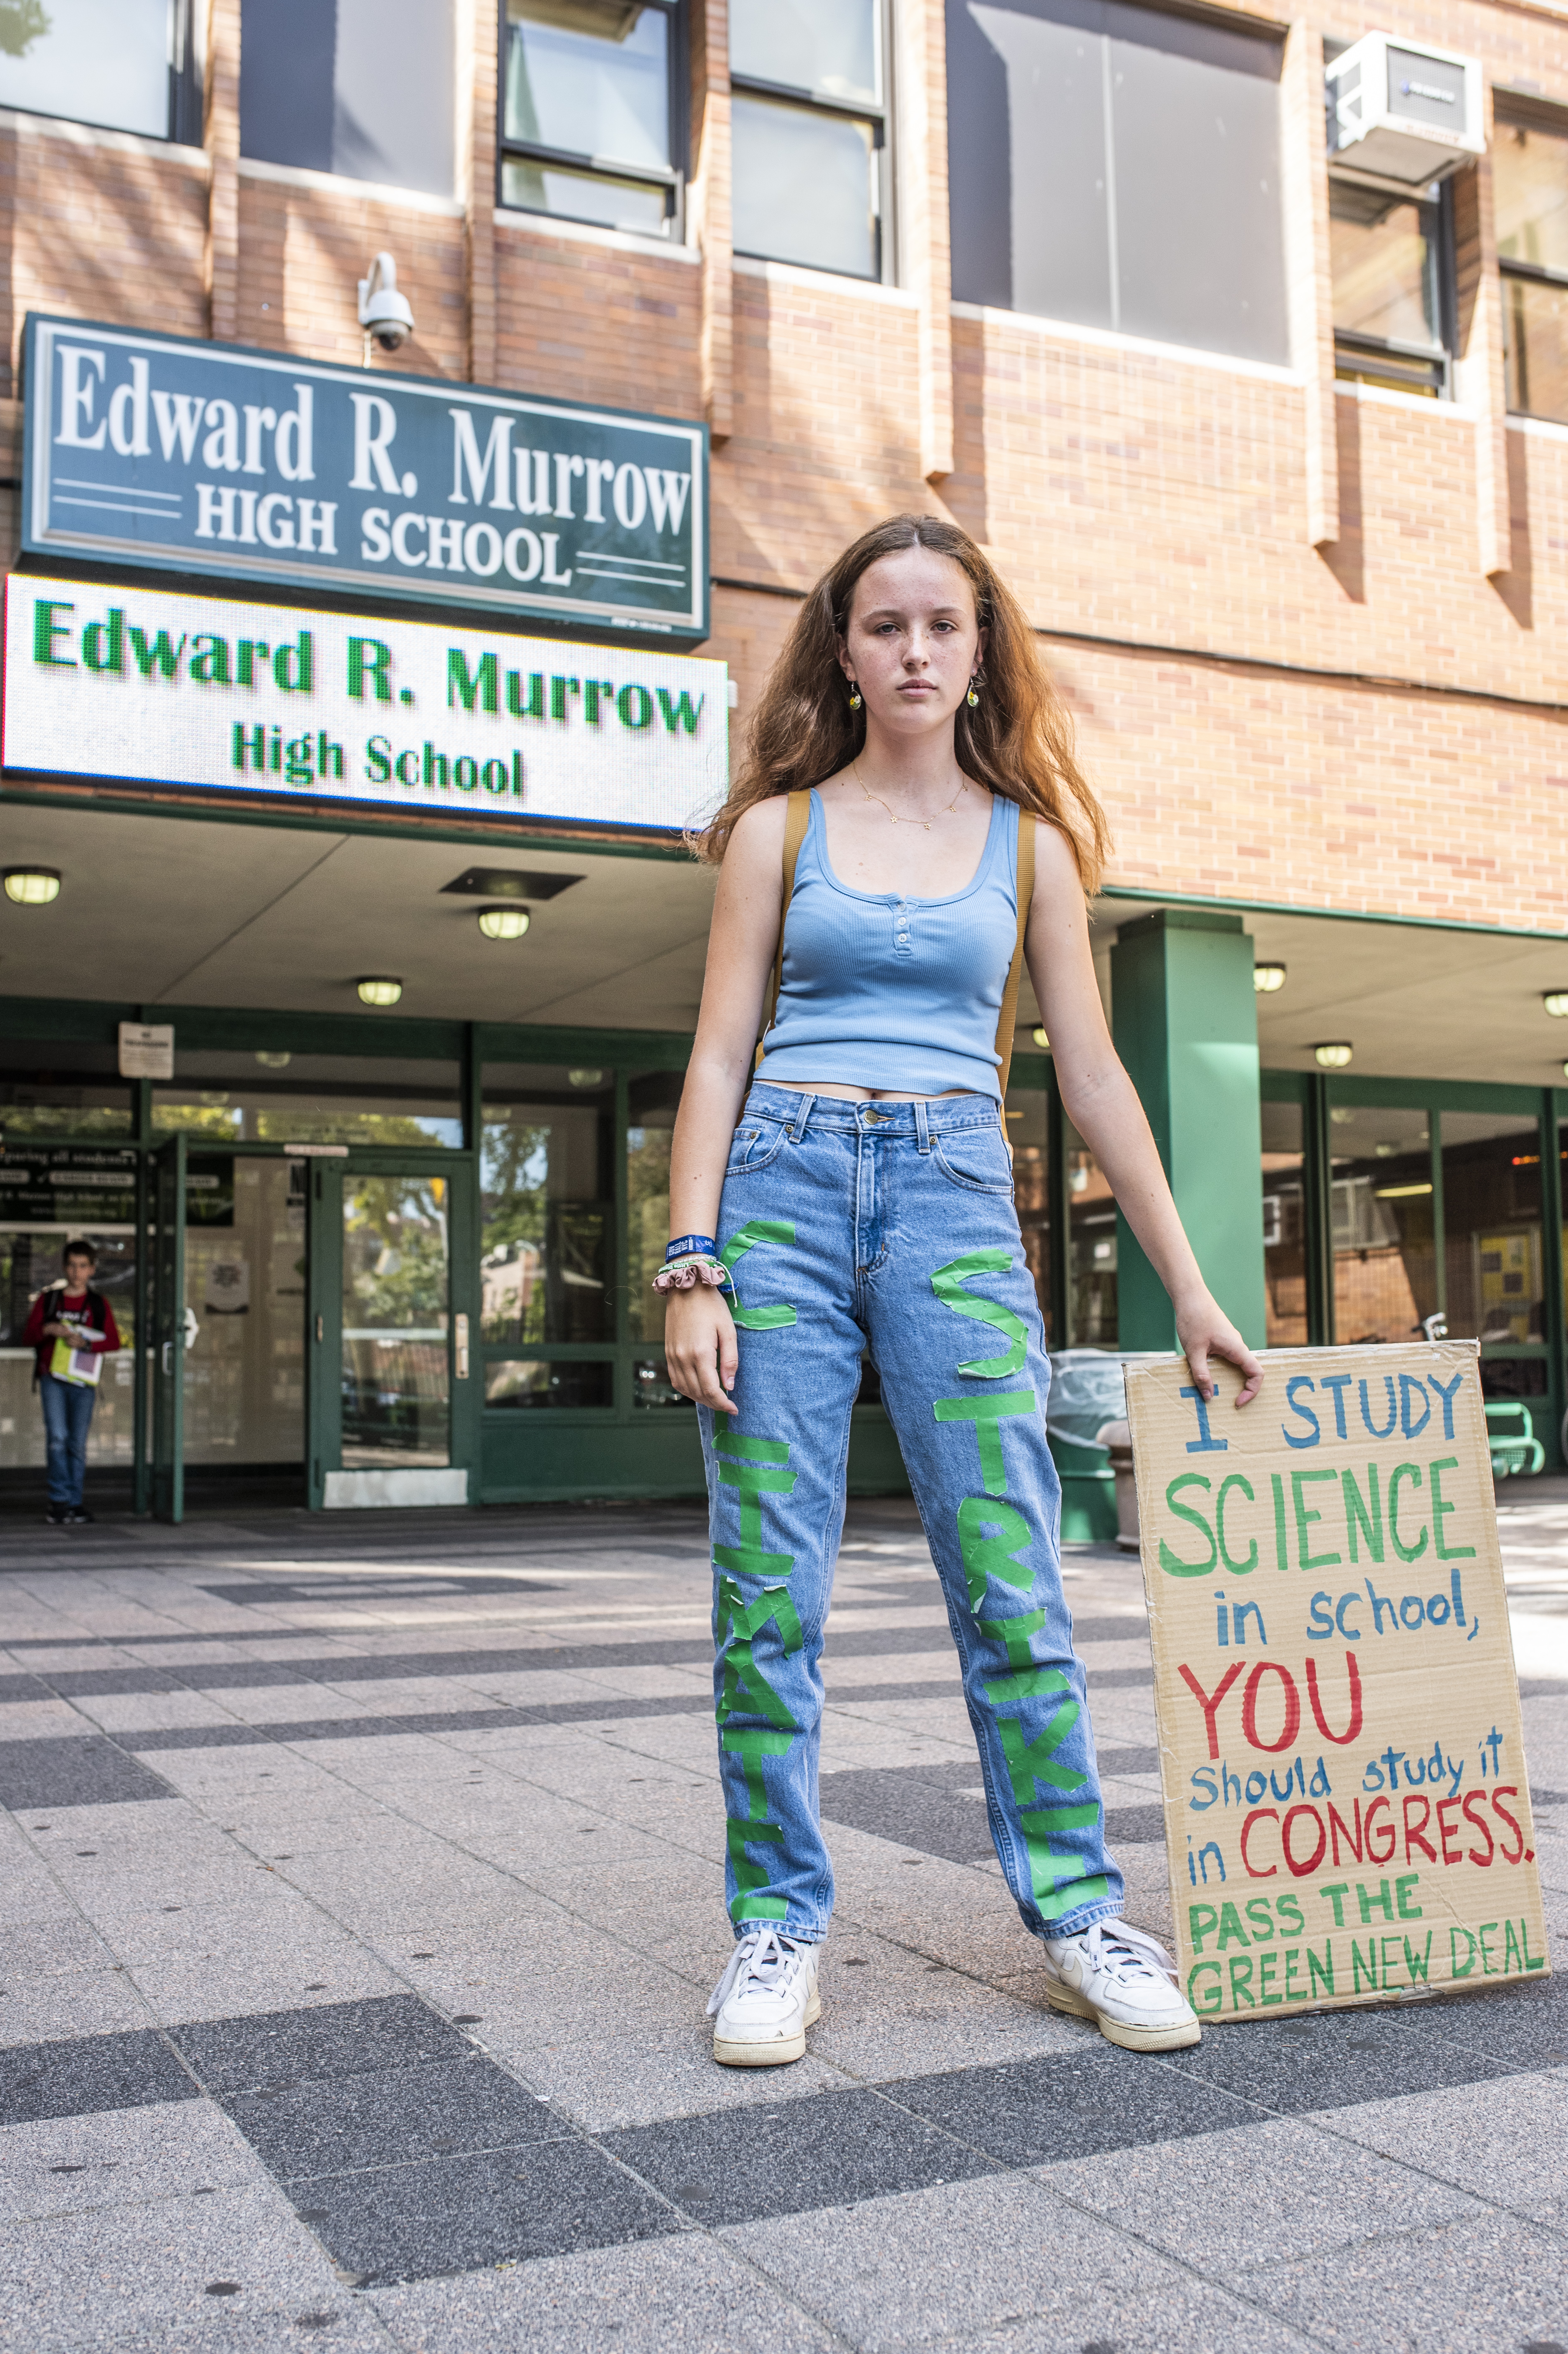 Anastasia Leahy, of Carrol Gardens, and a sophmore at Edward R. Murrow High School, was a lead organizer for her school's student walkout.